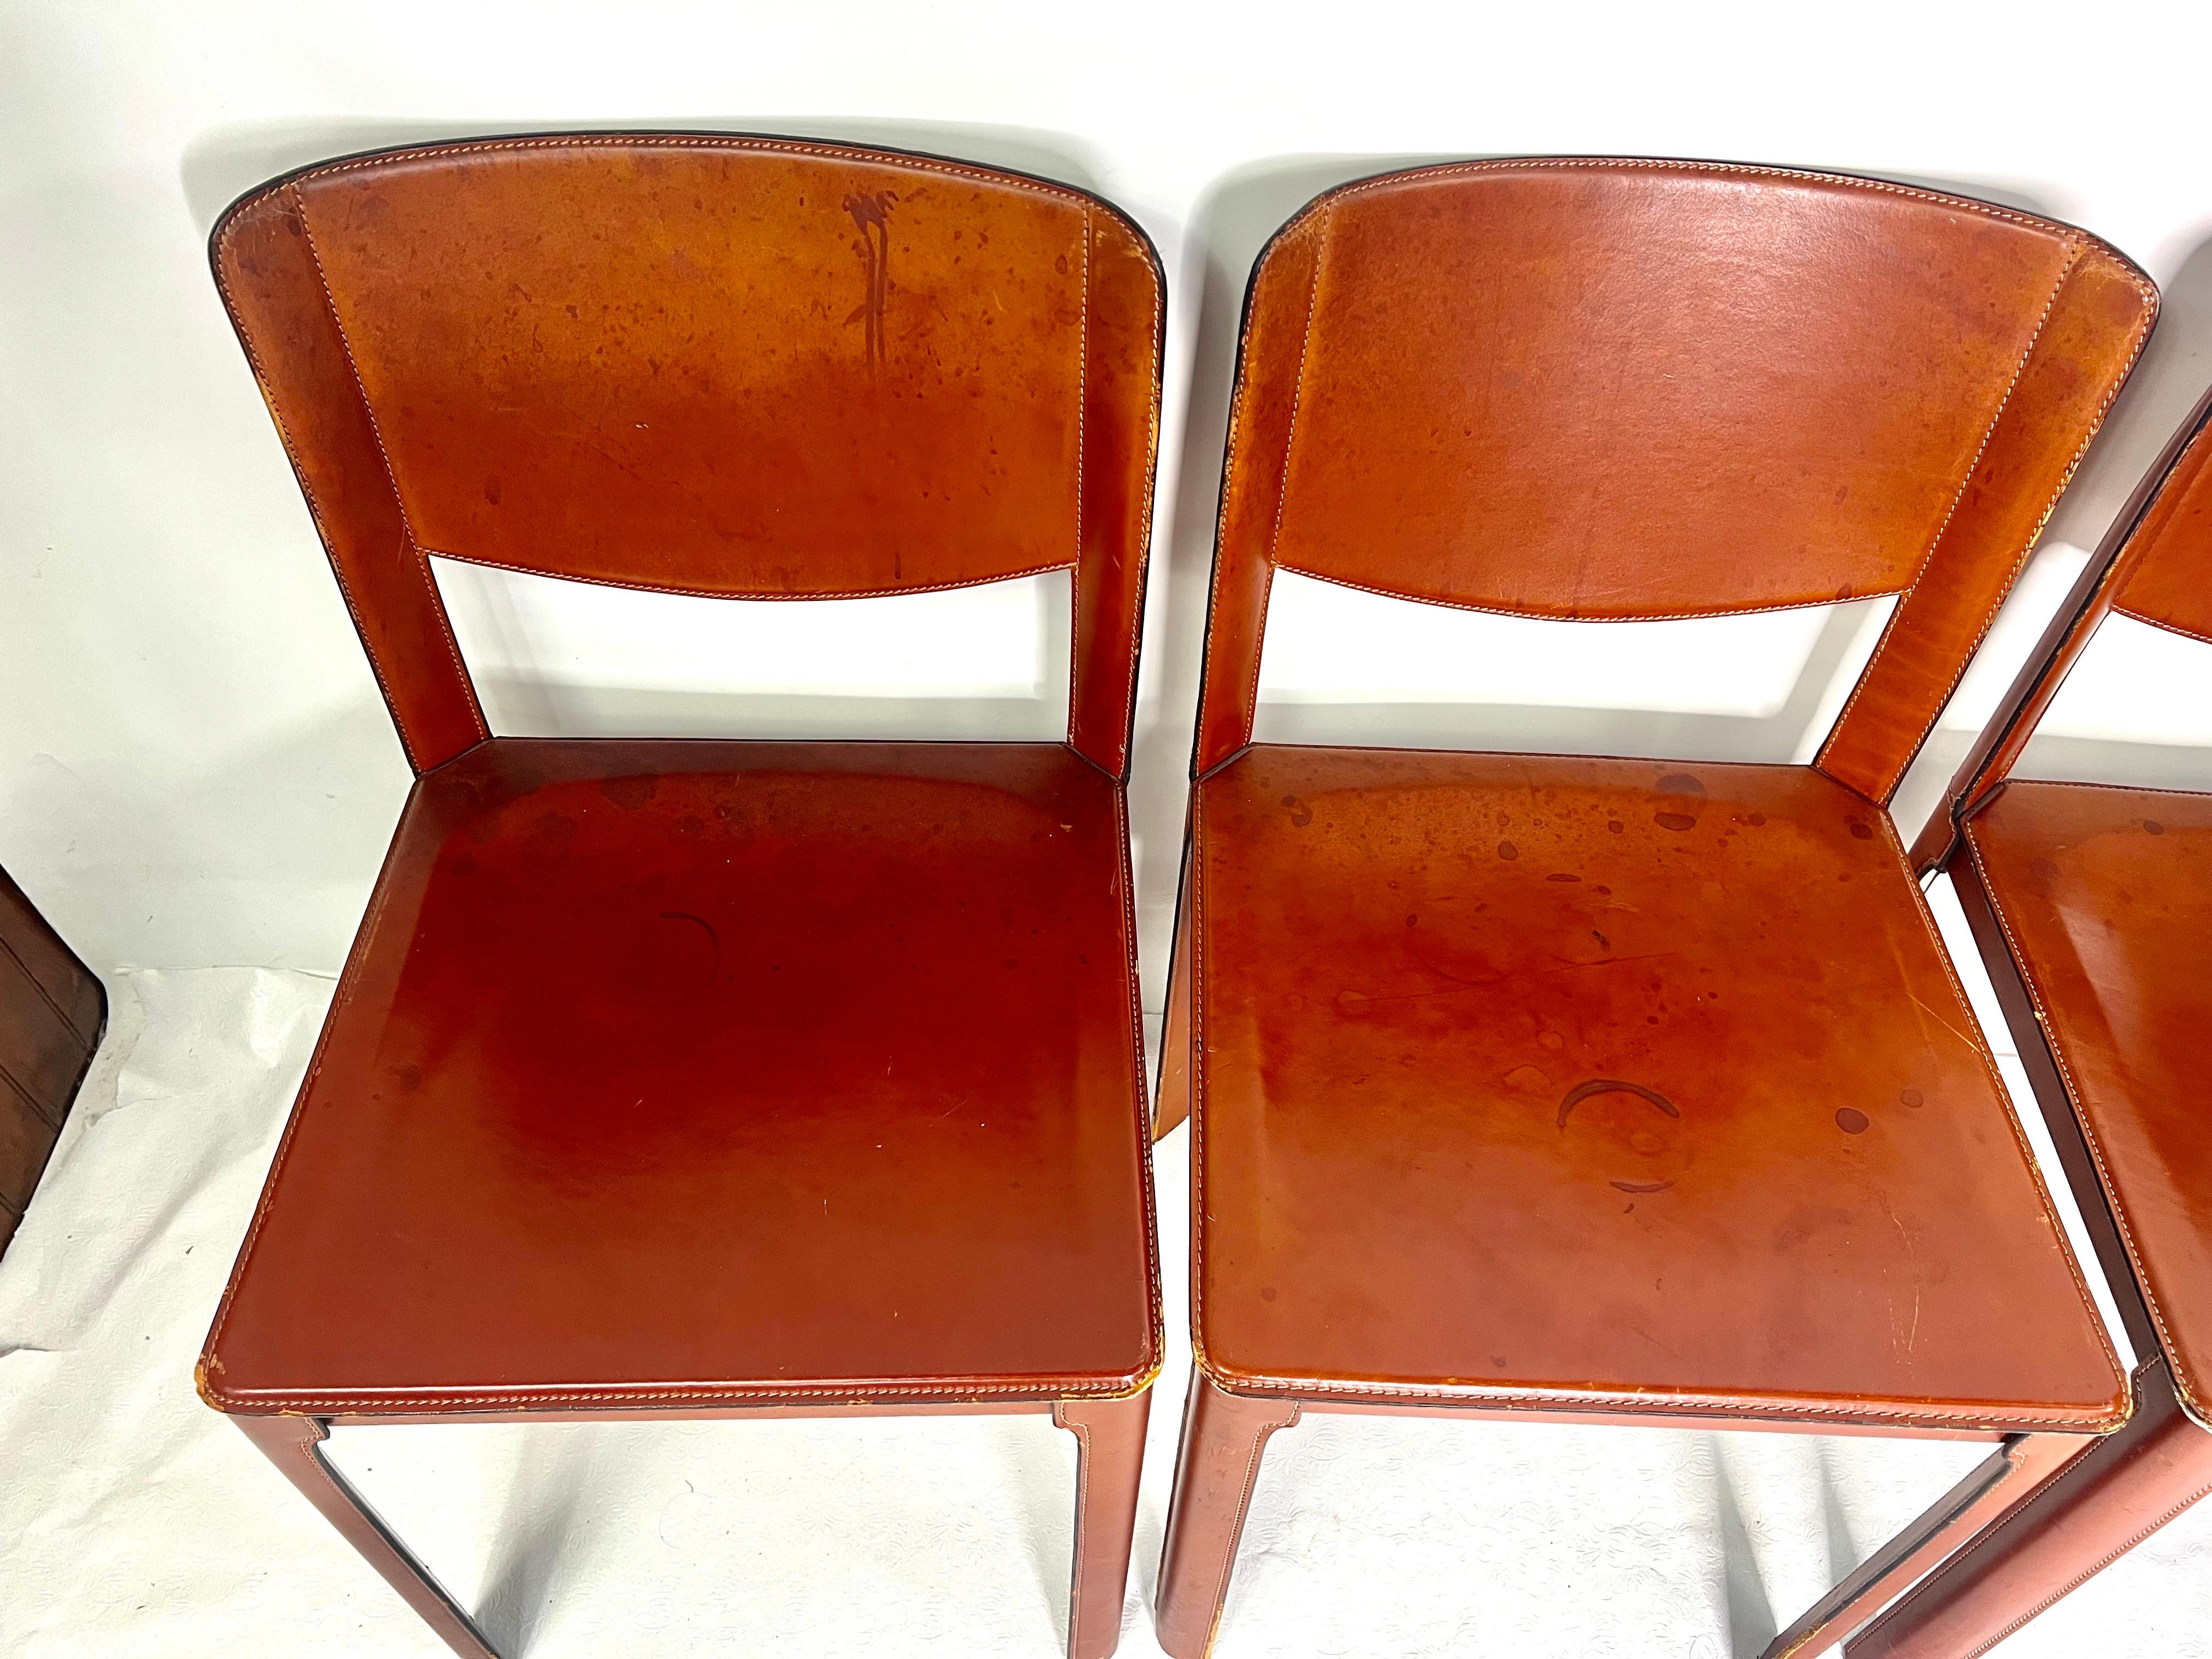 Italian Vintage Modern Matteo Grassi Red Leather Chairs, Set of 4 For Sale